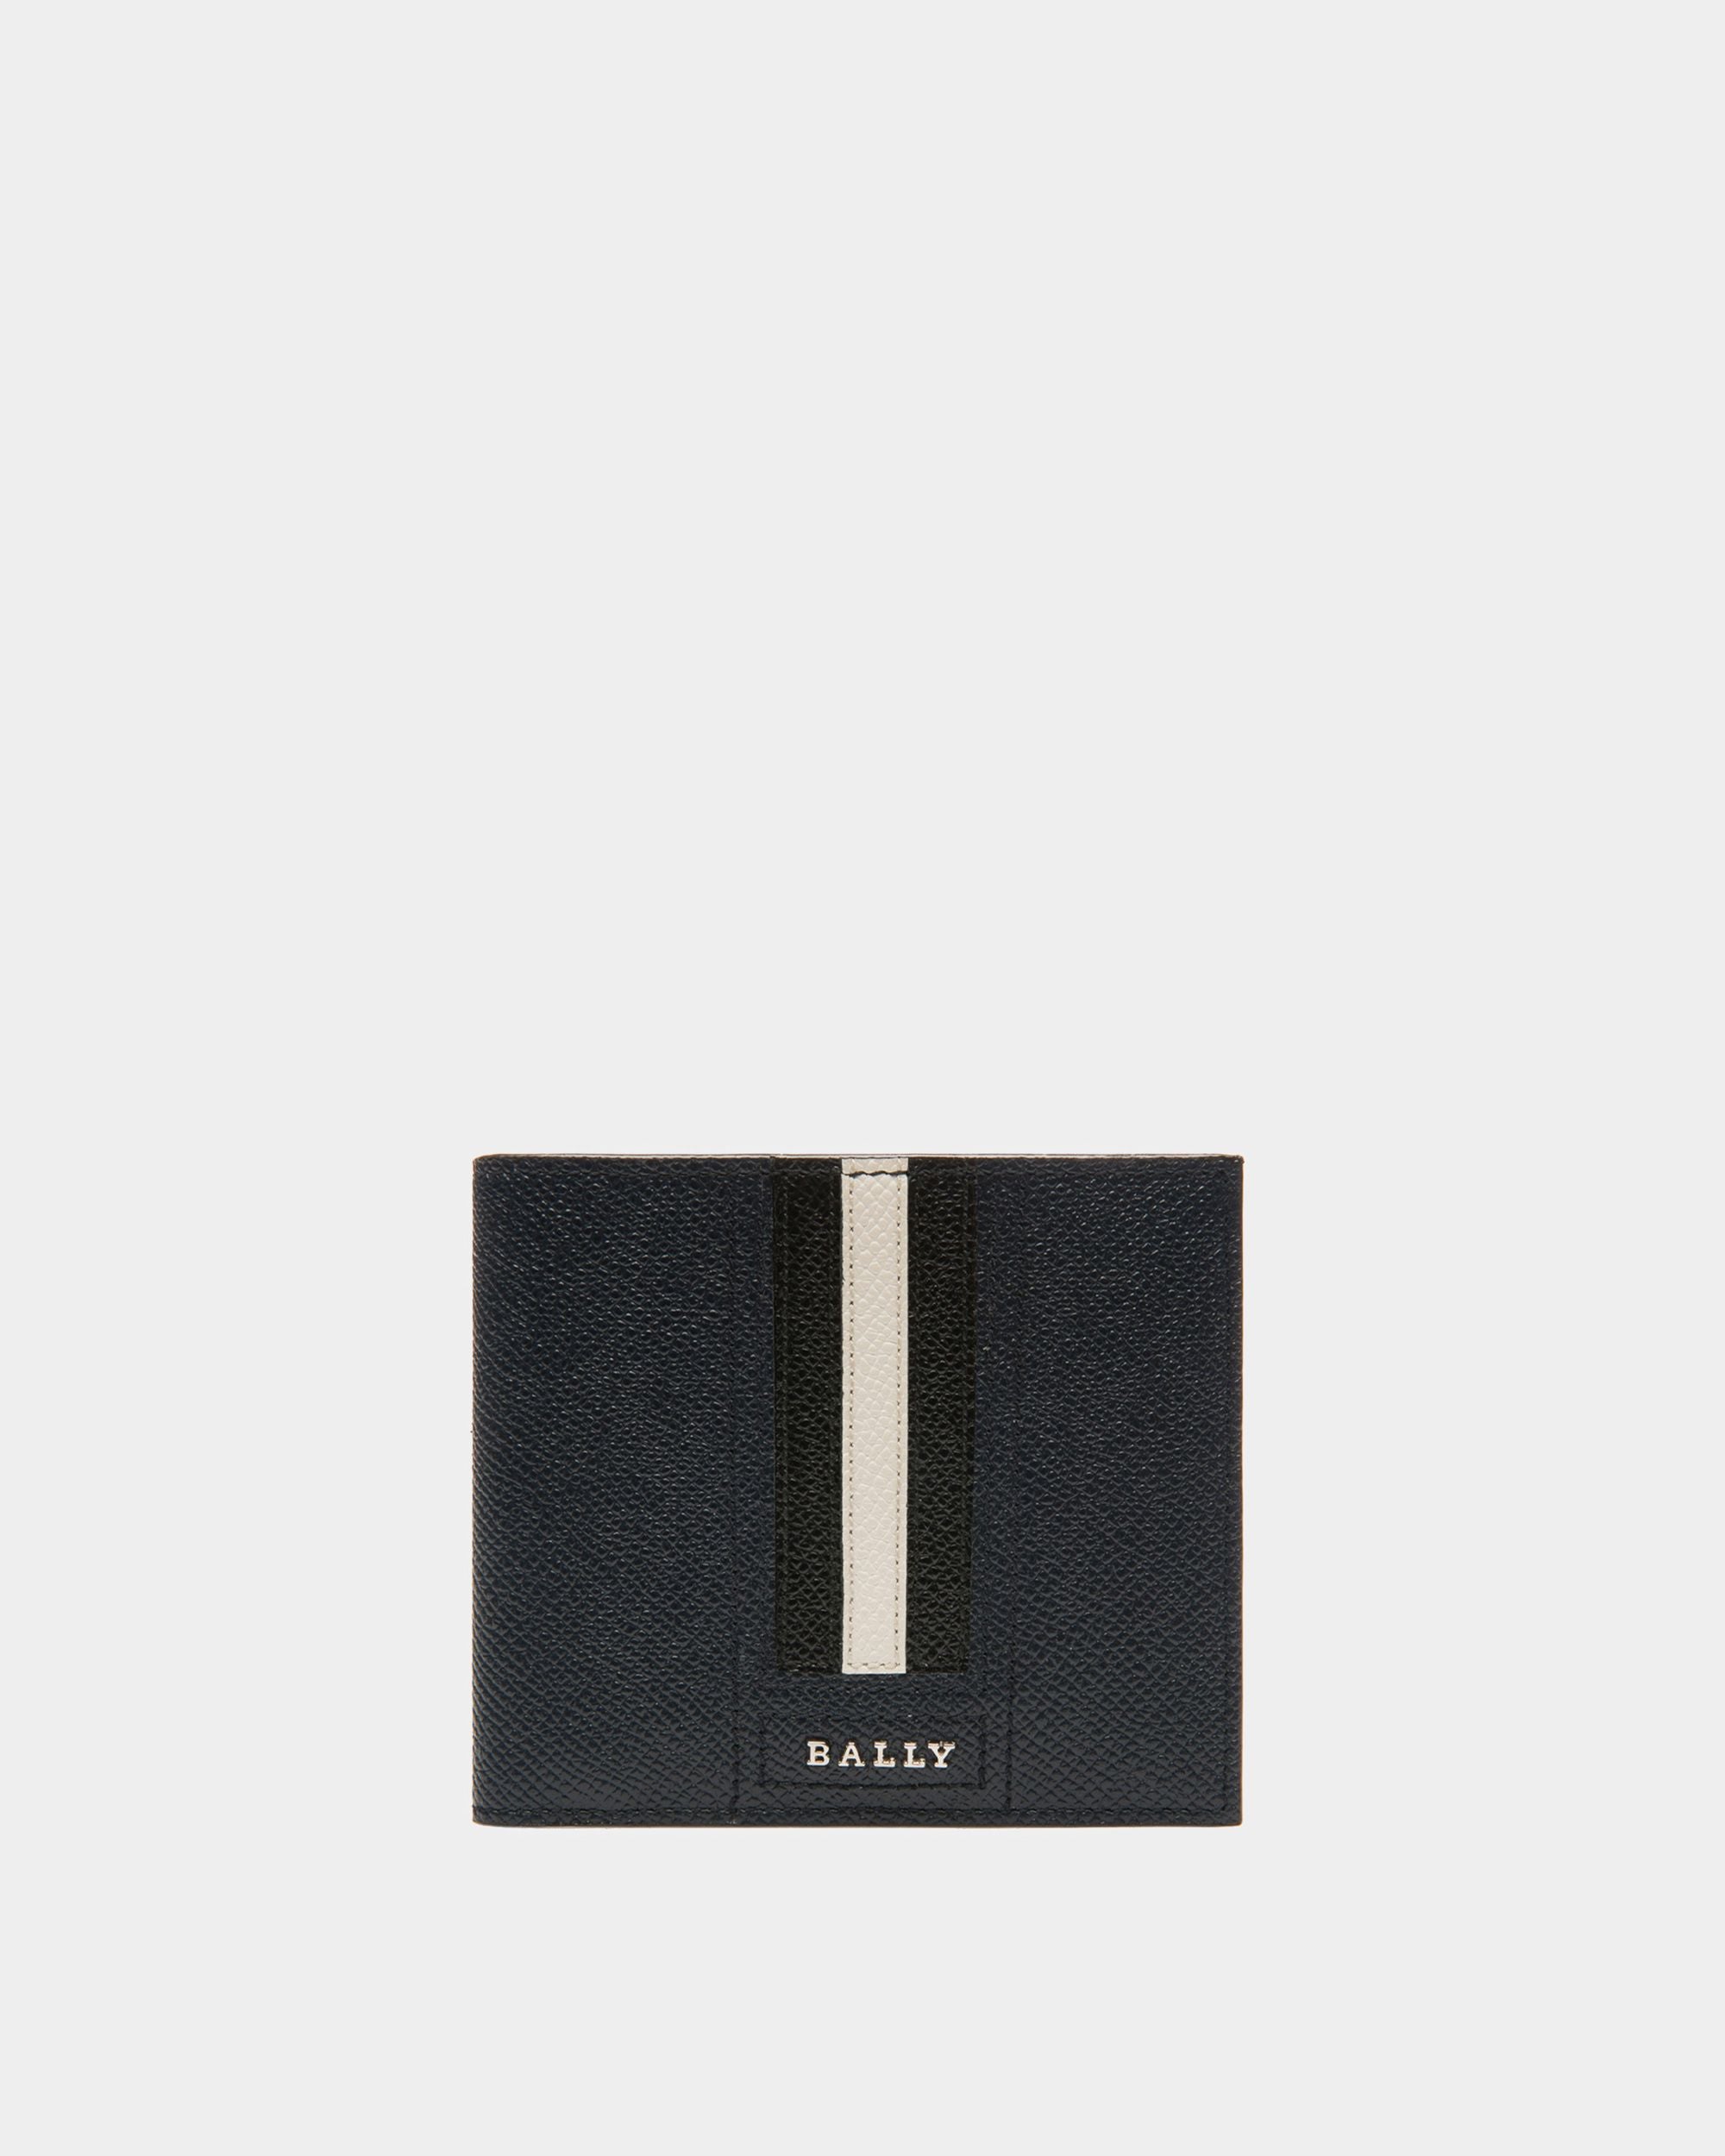 Trasai | Men's Wallets And Coin Purses | Blue Leather | Bally | Still Life Front